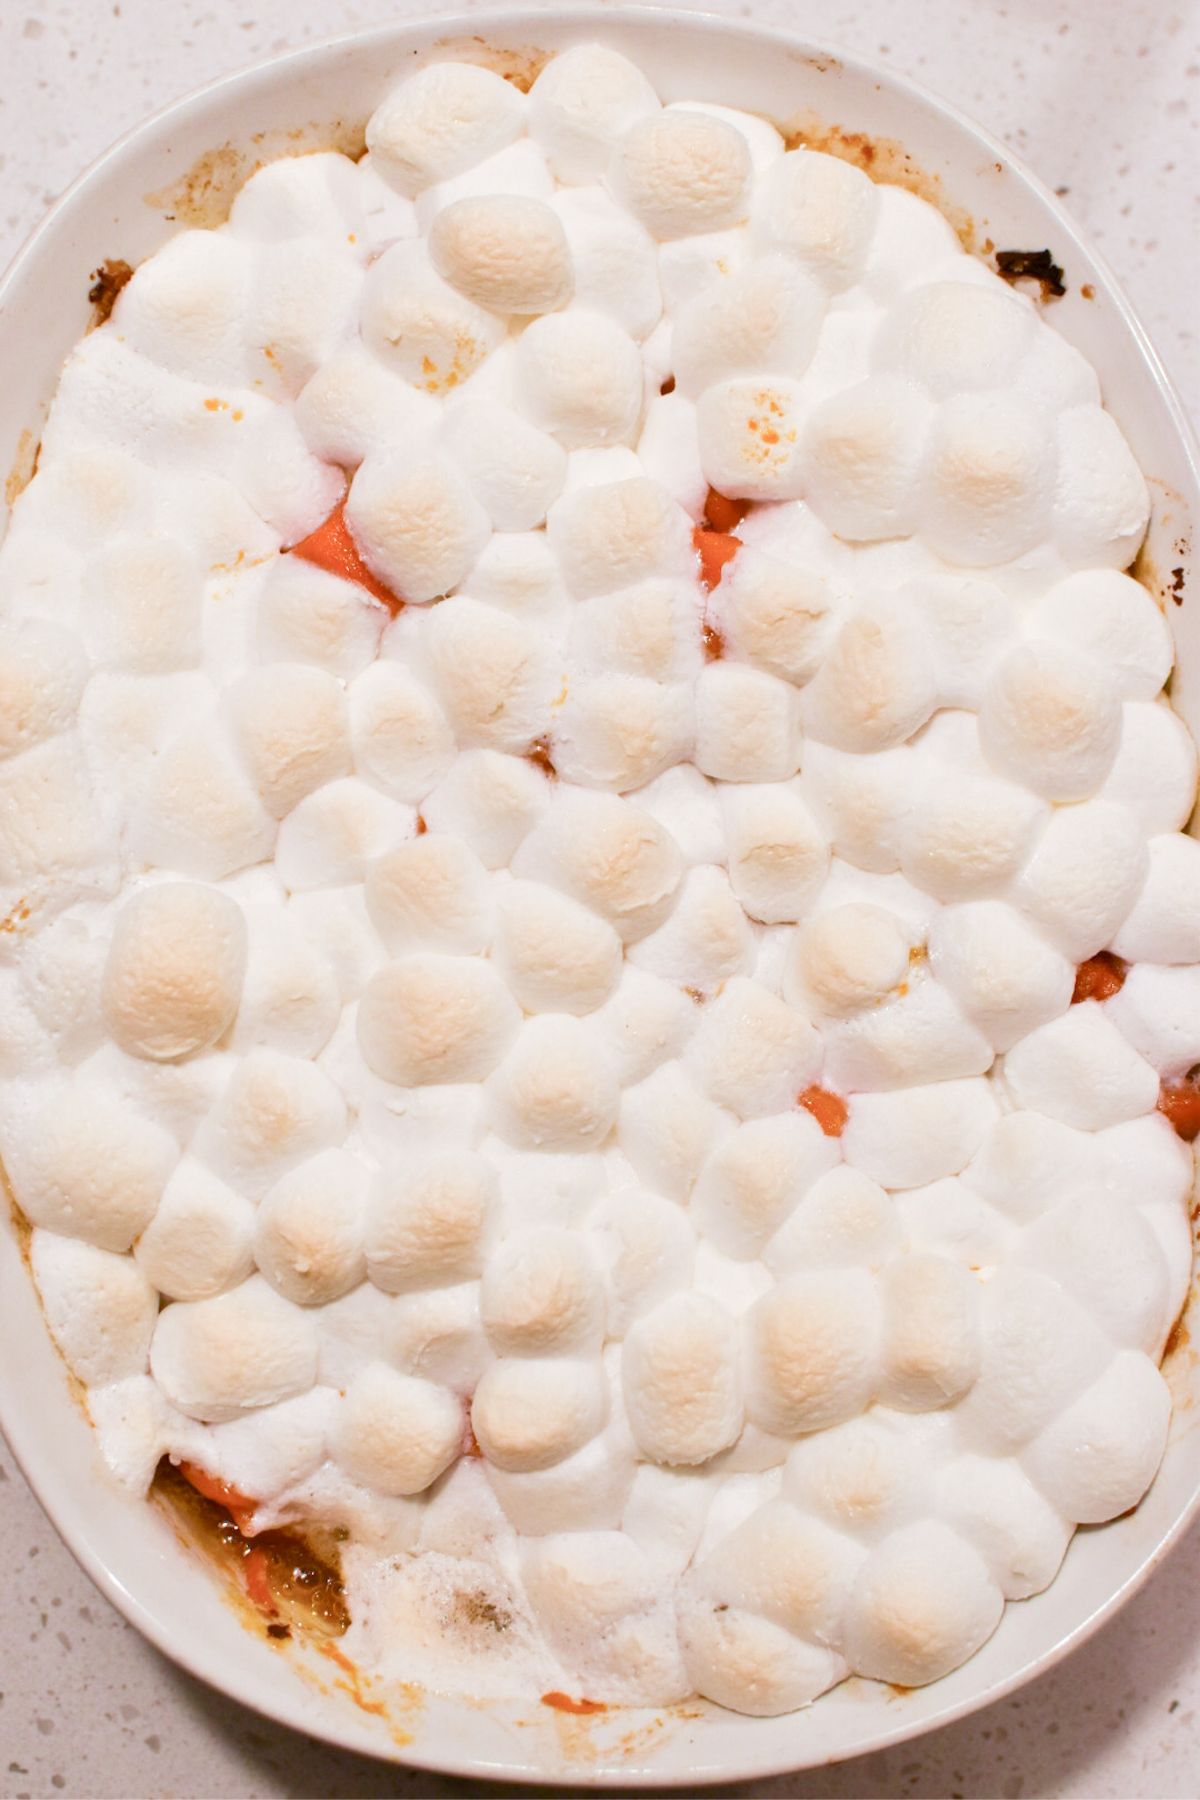 Candied yams with toasted marshmallows on top in a white casserole dish.